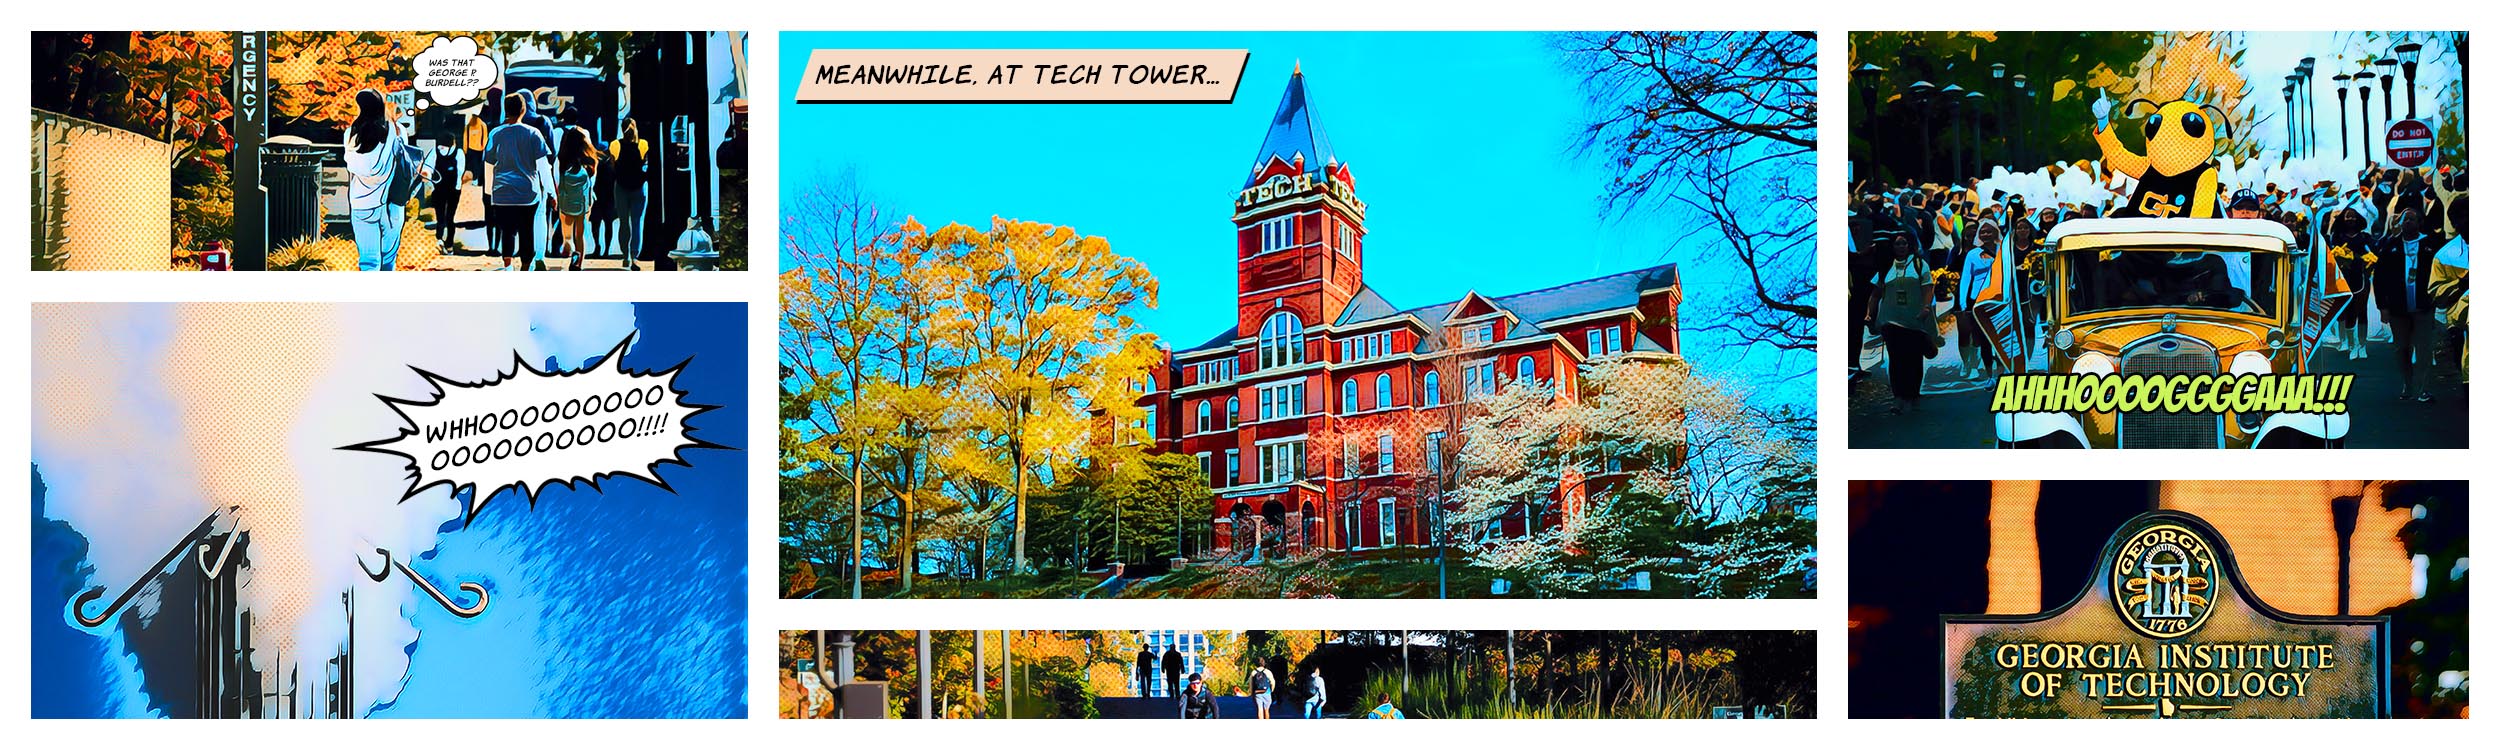 A comic strip effect featuring images of Tech Tower, the whistle, Buzz, the Ramblin' Wreck, campus, and the Georgia Tech sign